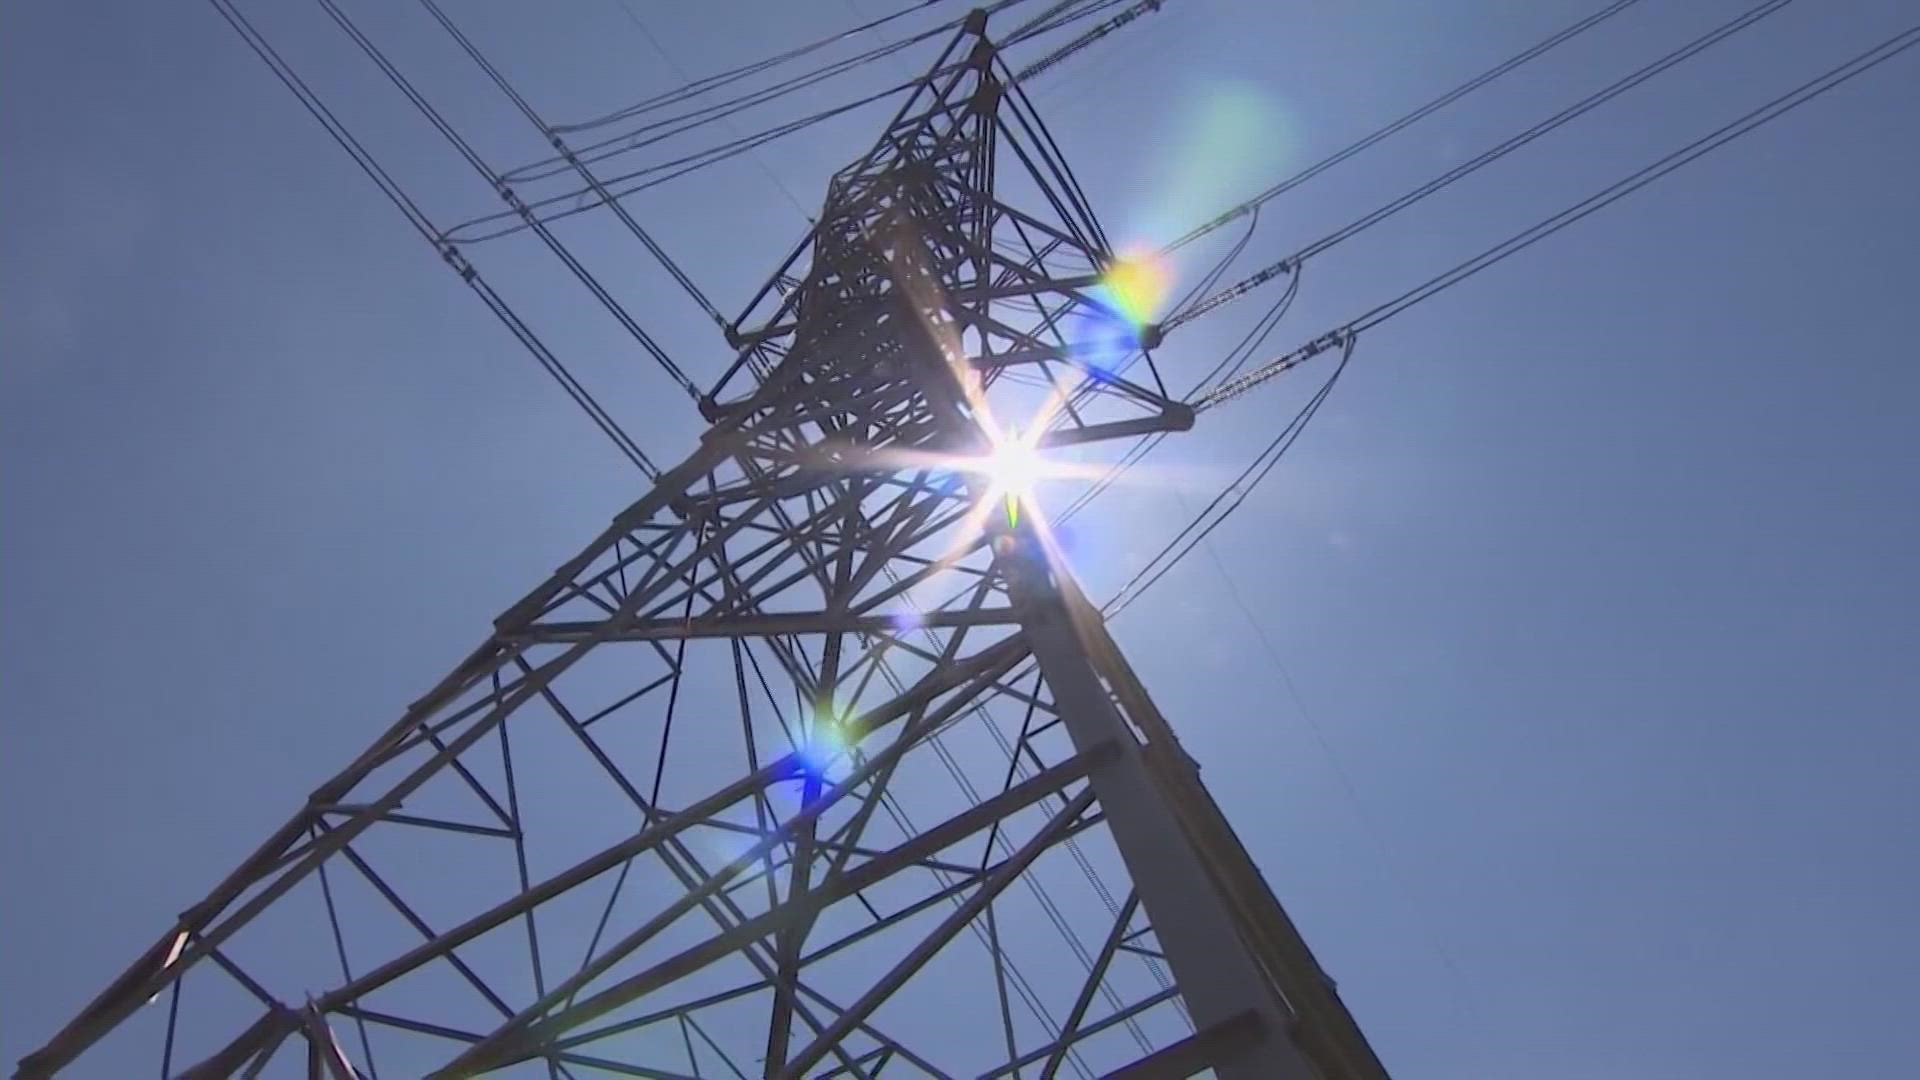 ERCOT preparing for Arctic cold weather in Texas | khou.com